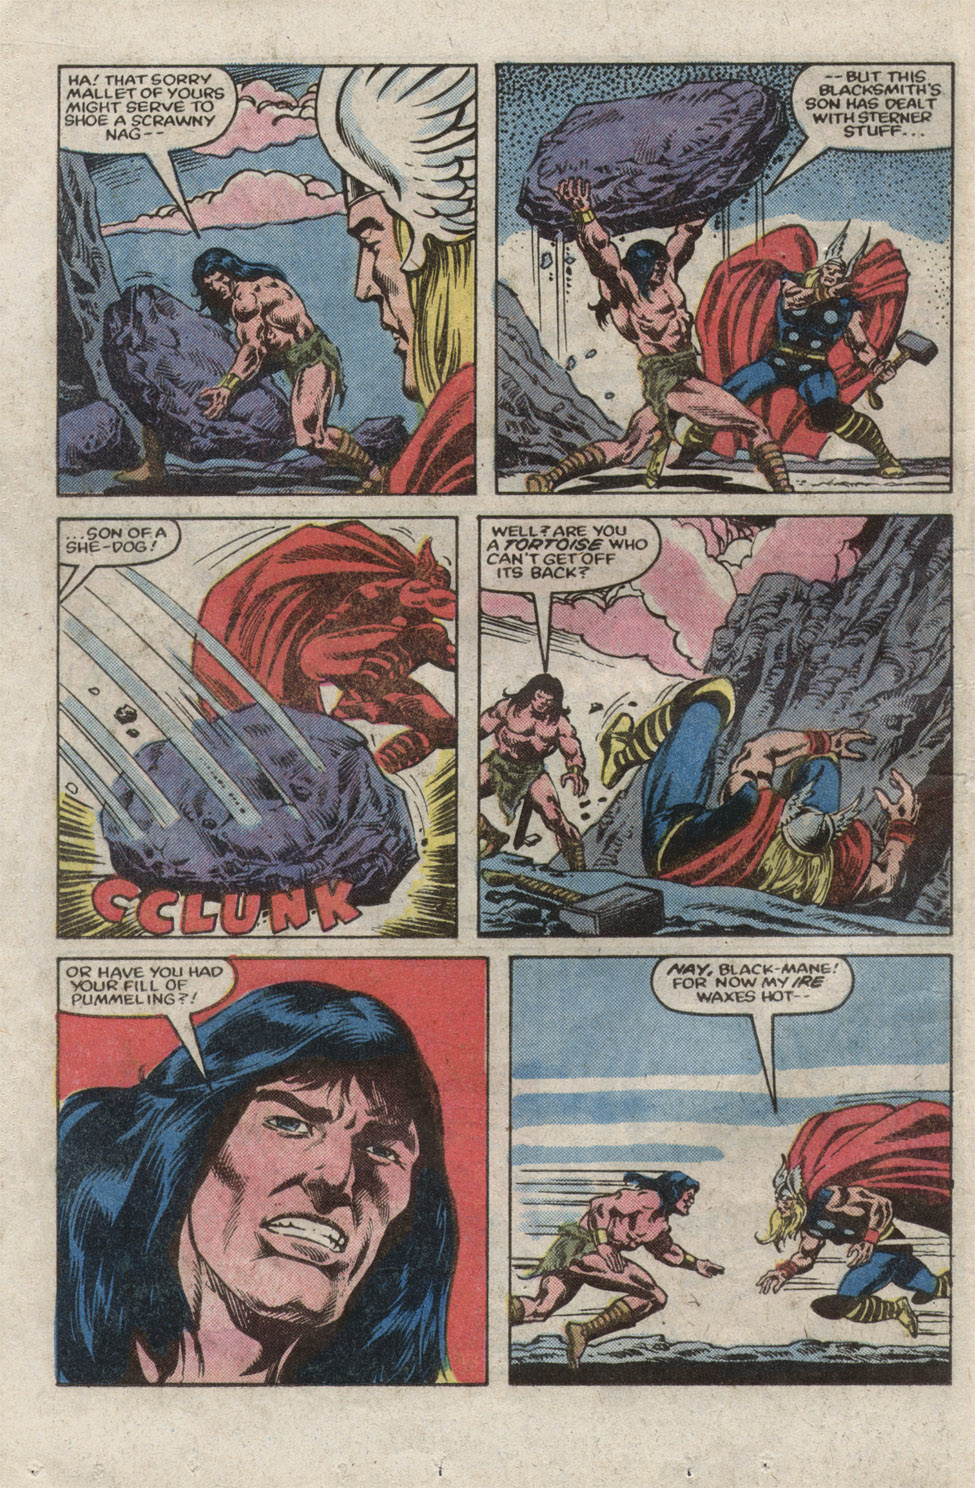 What If? (1977) issue 39 - Thor battled conan - Page 12